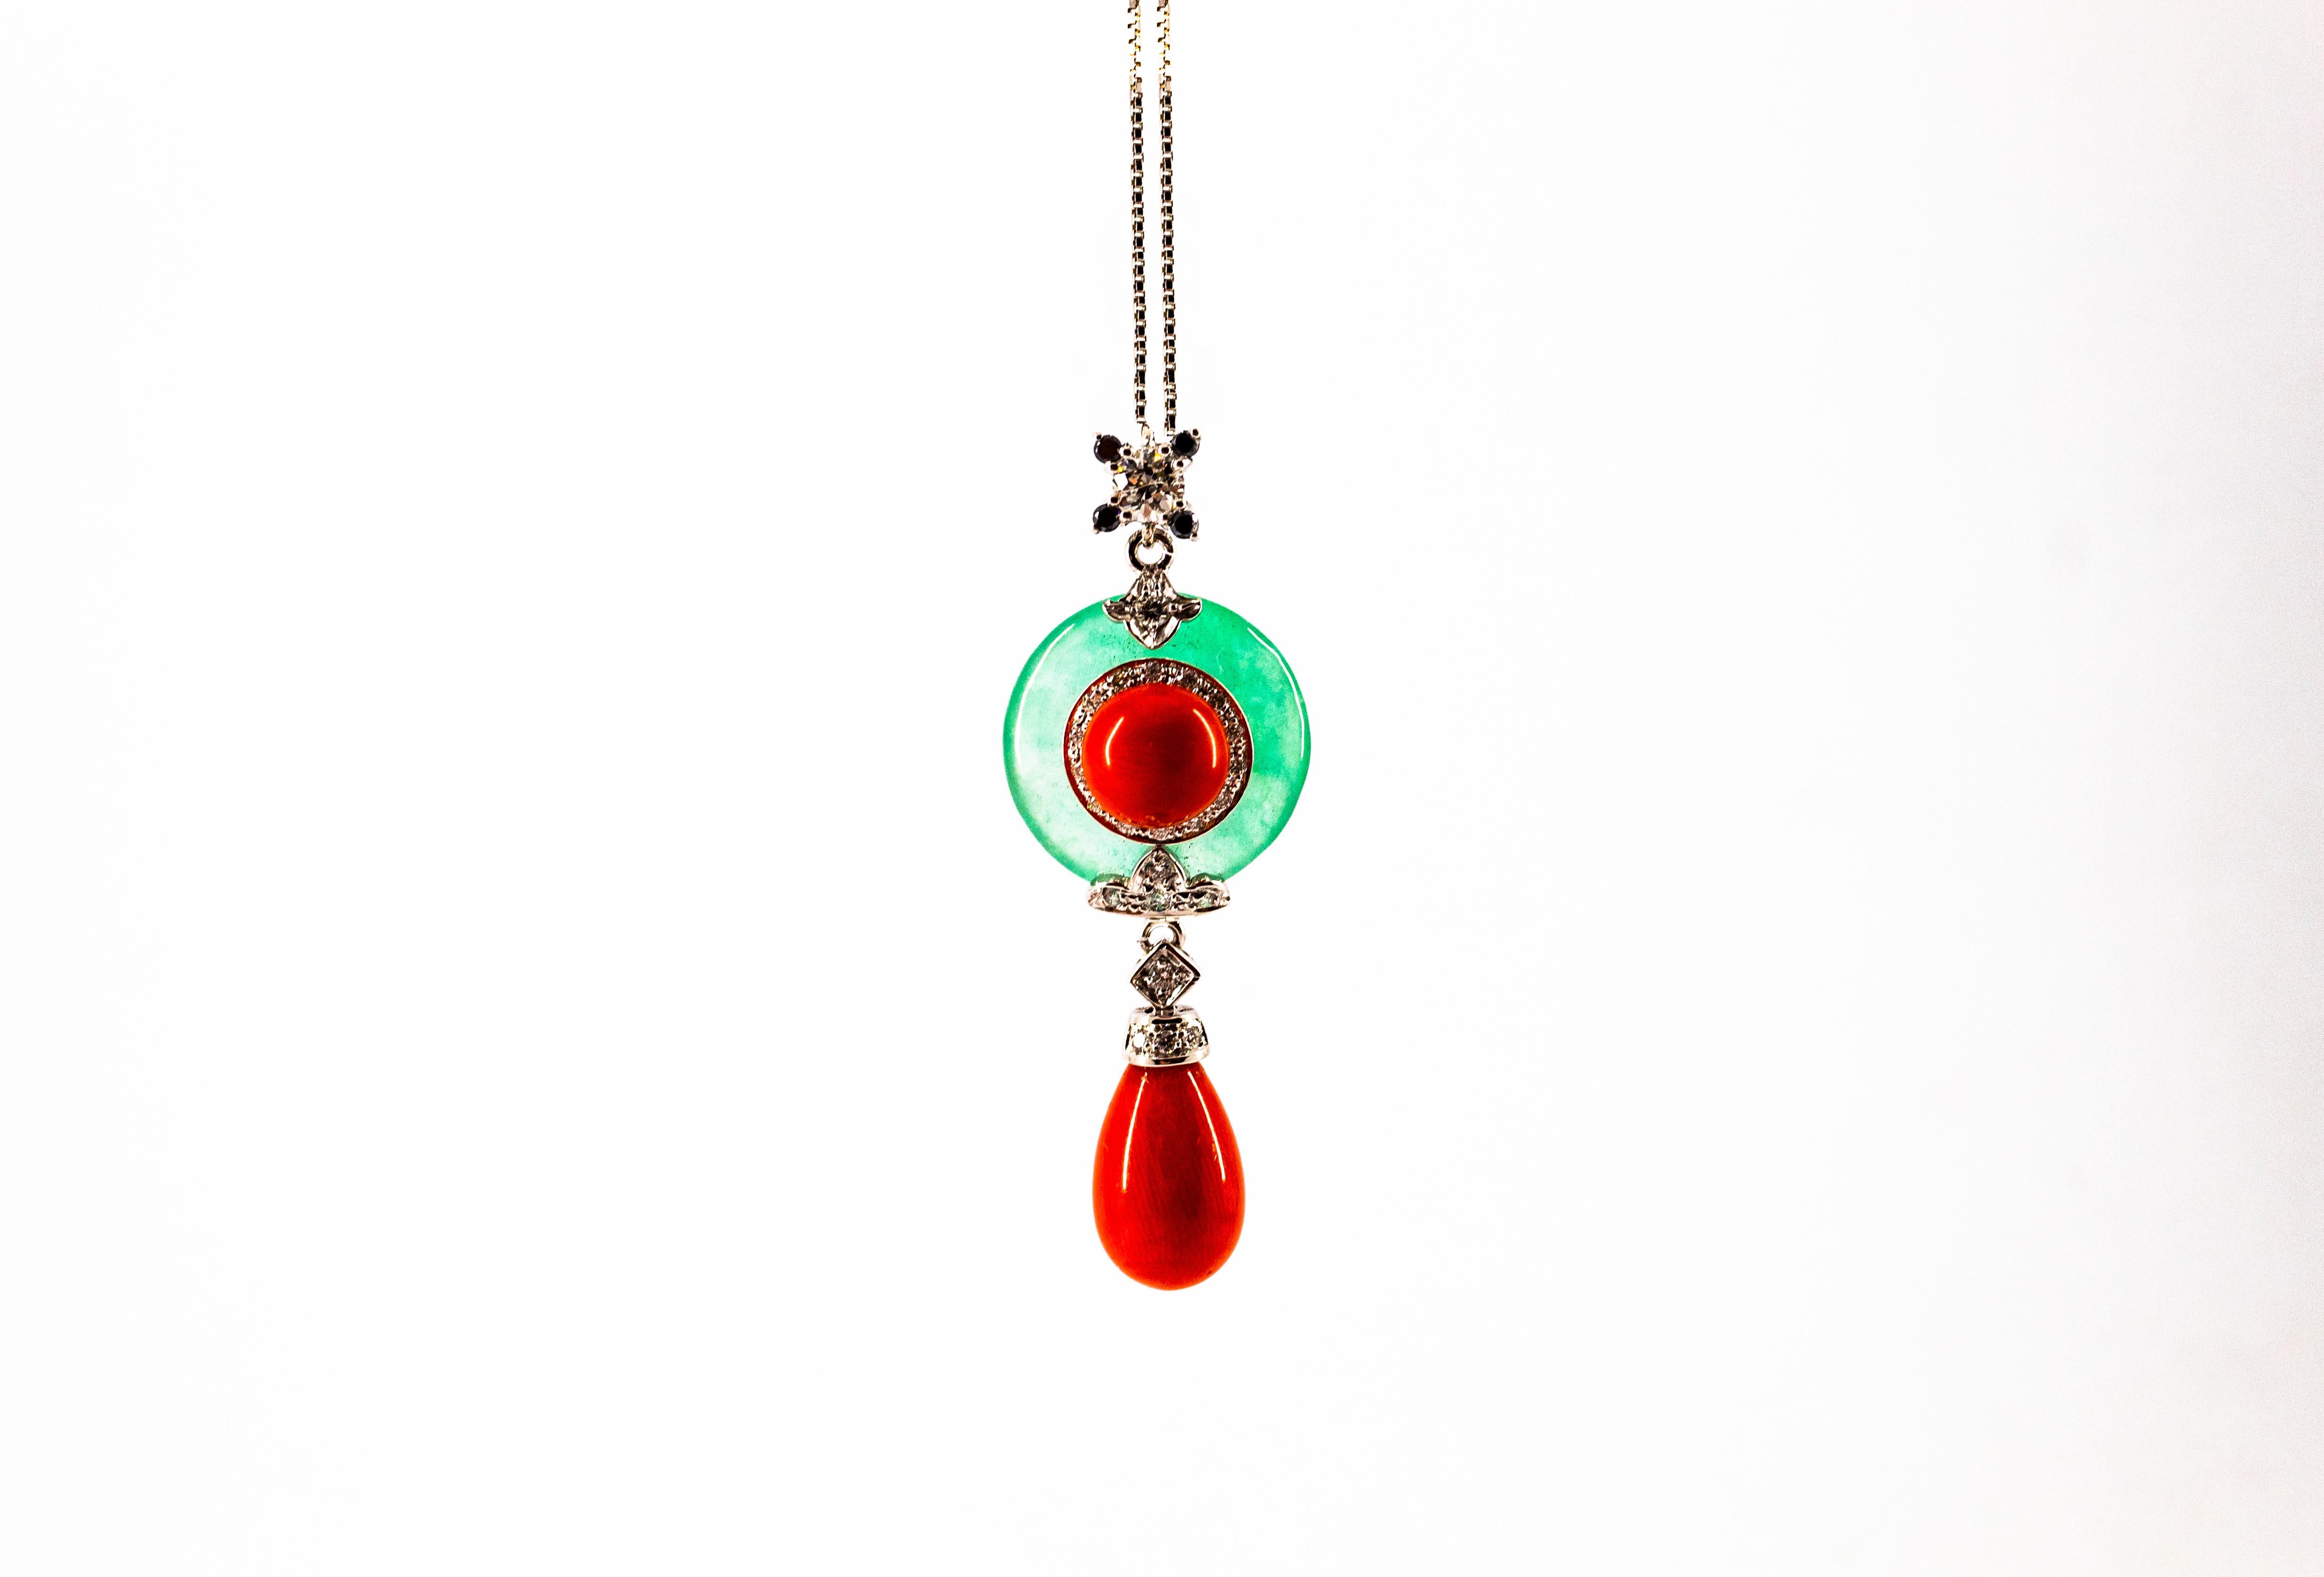 This Necklace is made of 14K White Gold.
This Necklace has 0.38 Carats of White Diamonds.
This Necklace has 0.04 Carats of Black Diamonds.
This Necklace has also Jade and Mediterranean (Sardinia, Italy) Red Coral.
Necklace Length is 42cm.
We're a